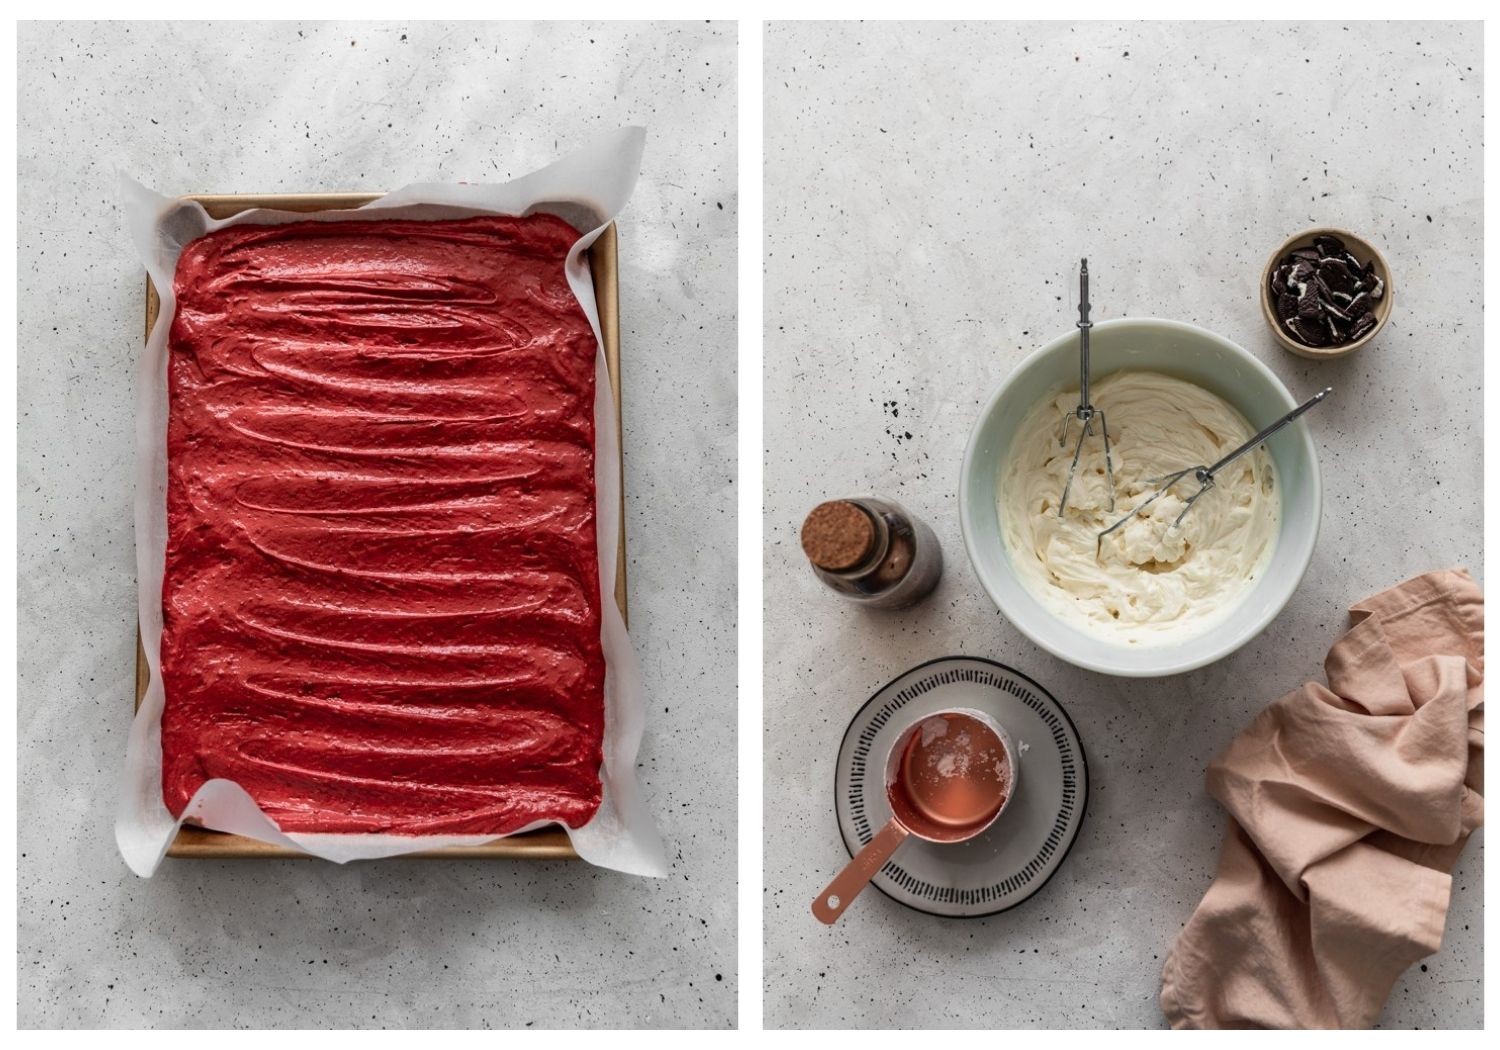 Two bird's eye view images. On the left, a sheet pan filled with burgundy cake batter on a grey table. On the right, a white bowl of frosting on a grey table surrounded by frosting ingredients and a pink linen.